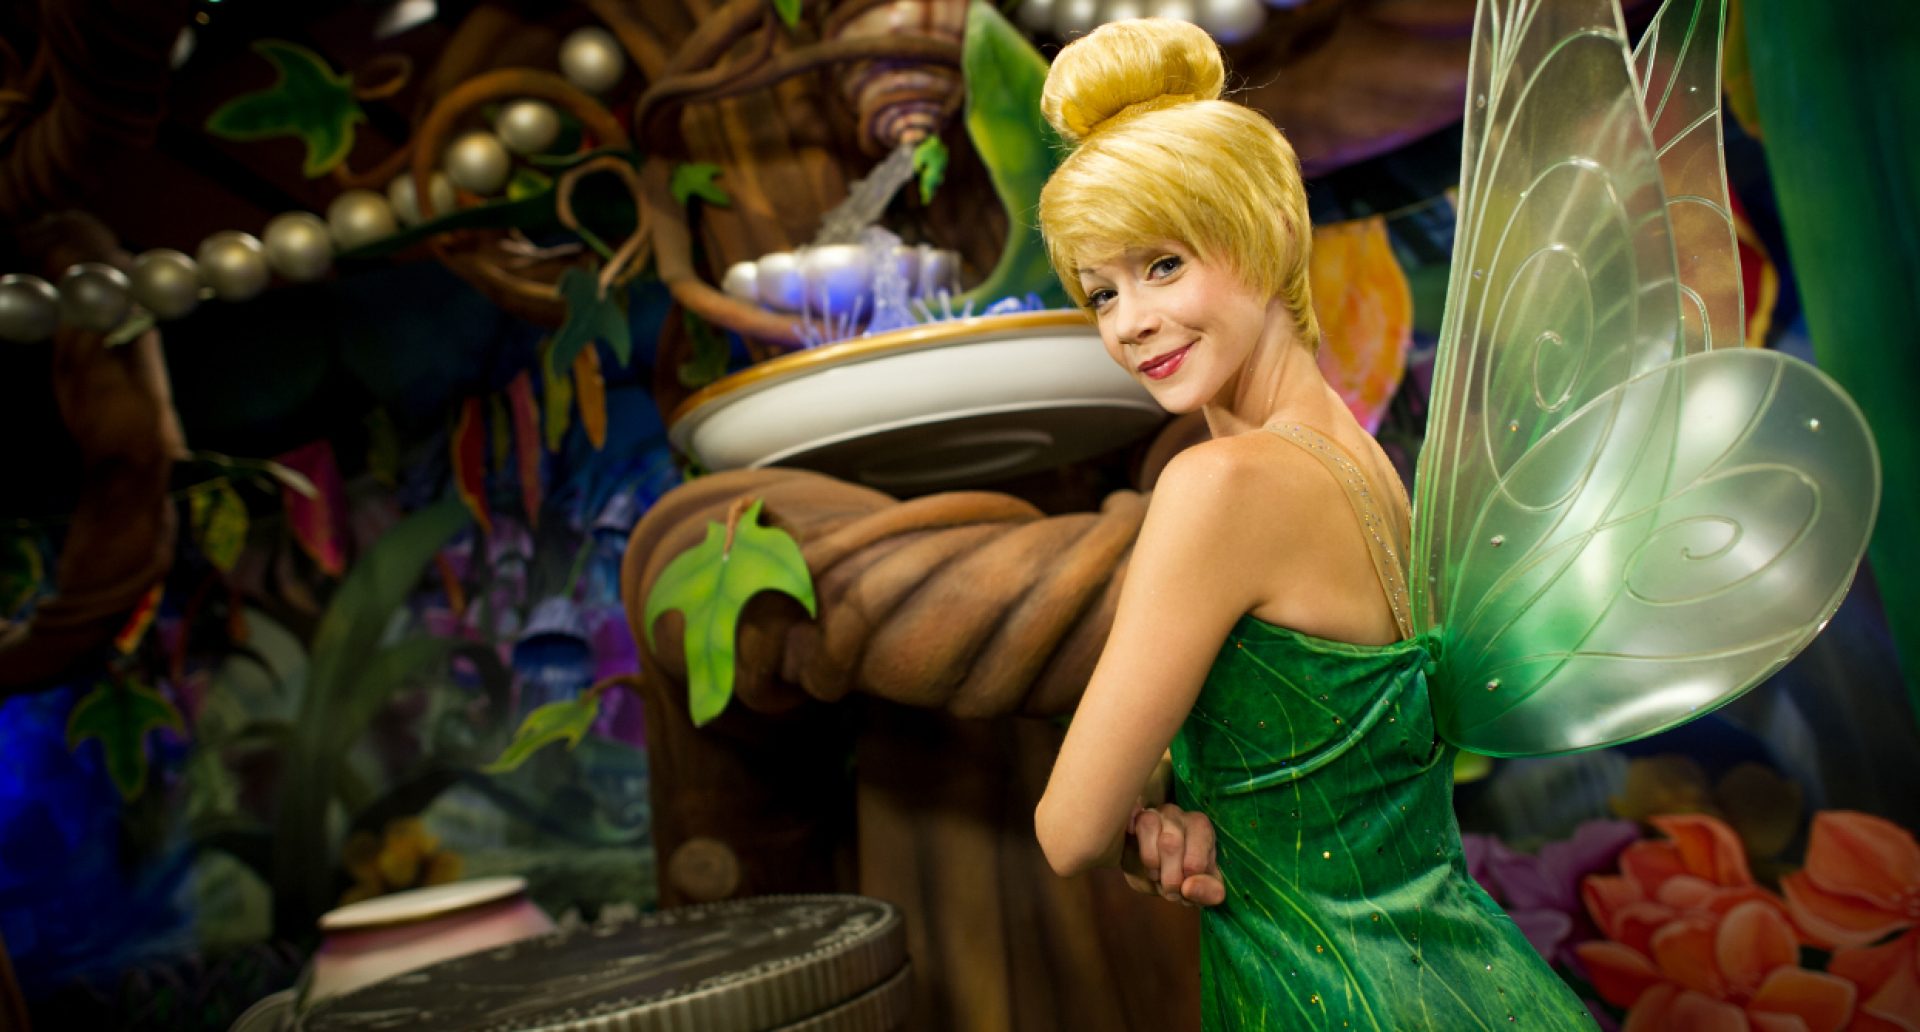 An actress dressed as Disney's Tinkerbell standing in foreground with arms crossed, forest in background..